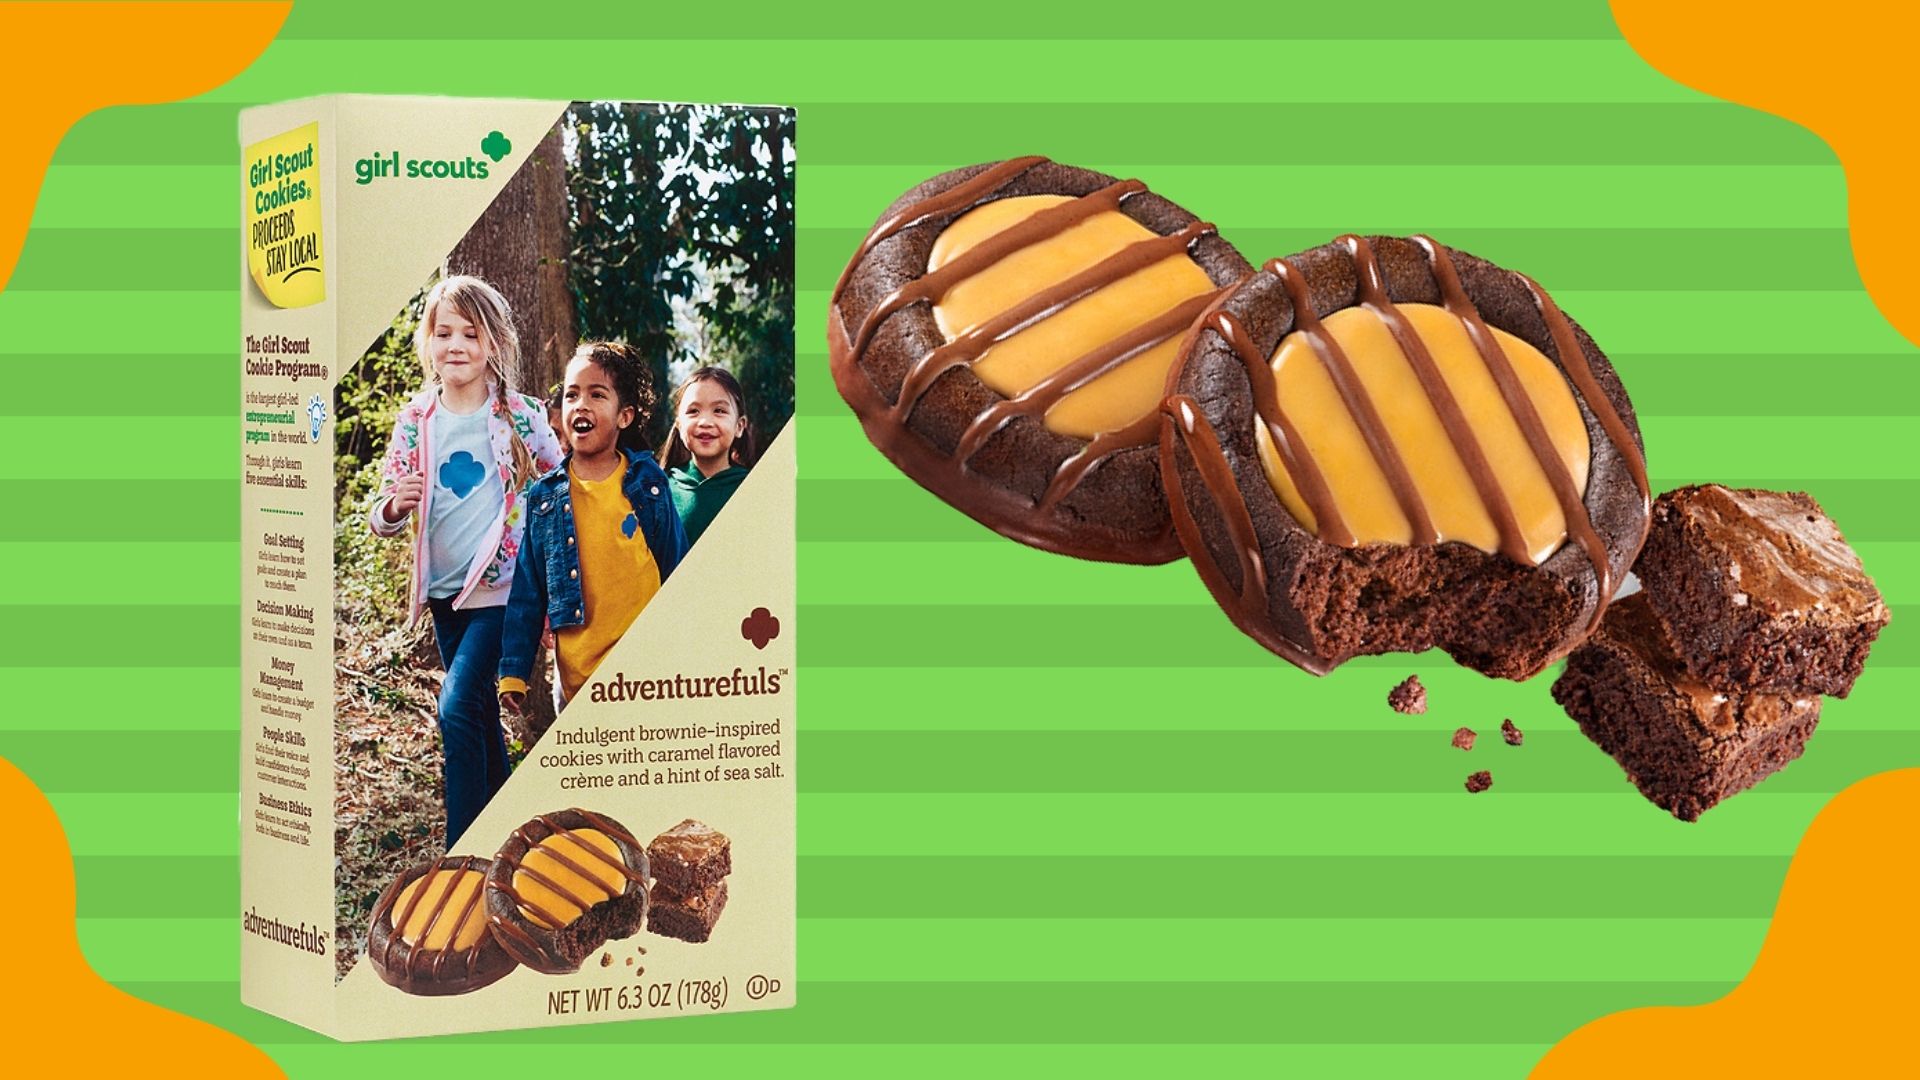 The 2022 New Girl Scout Cookie Flavor Looks Amazing Woman's World